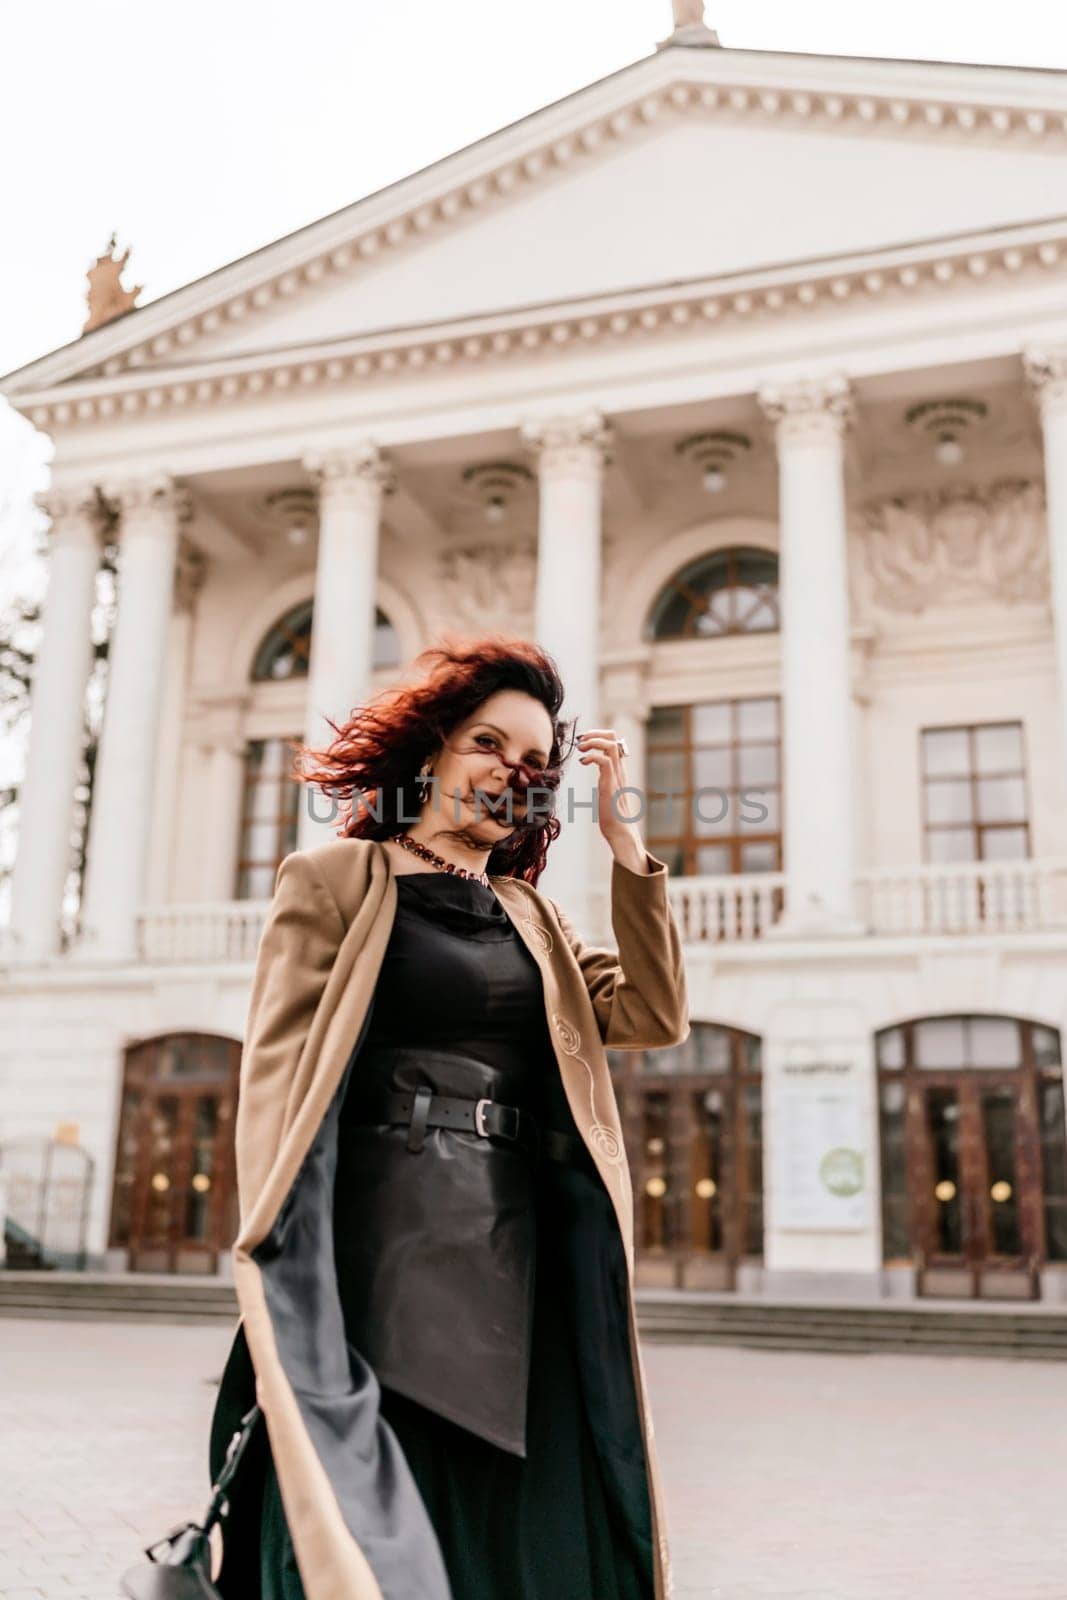 Woman street lifestyle. Image of stylish woman walking through European city on sunny day. Pretty woman with dark flowing hair, dressed in a beige raincoat and black, walks along the building. by Matiunina